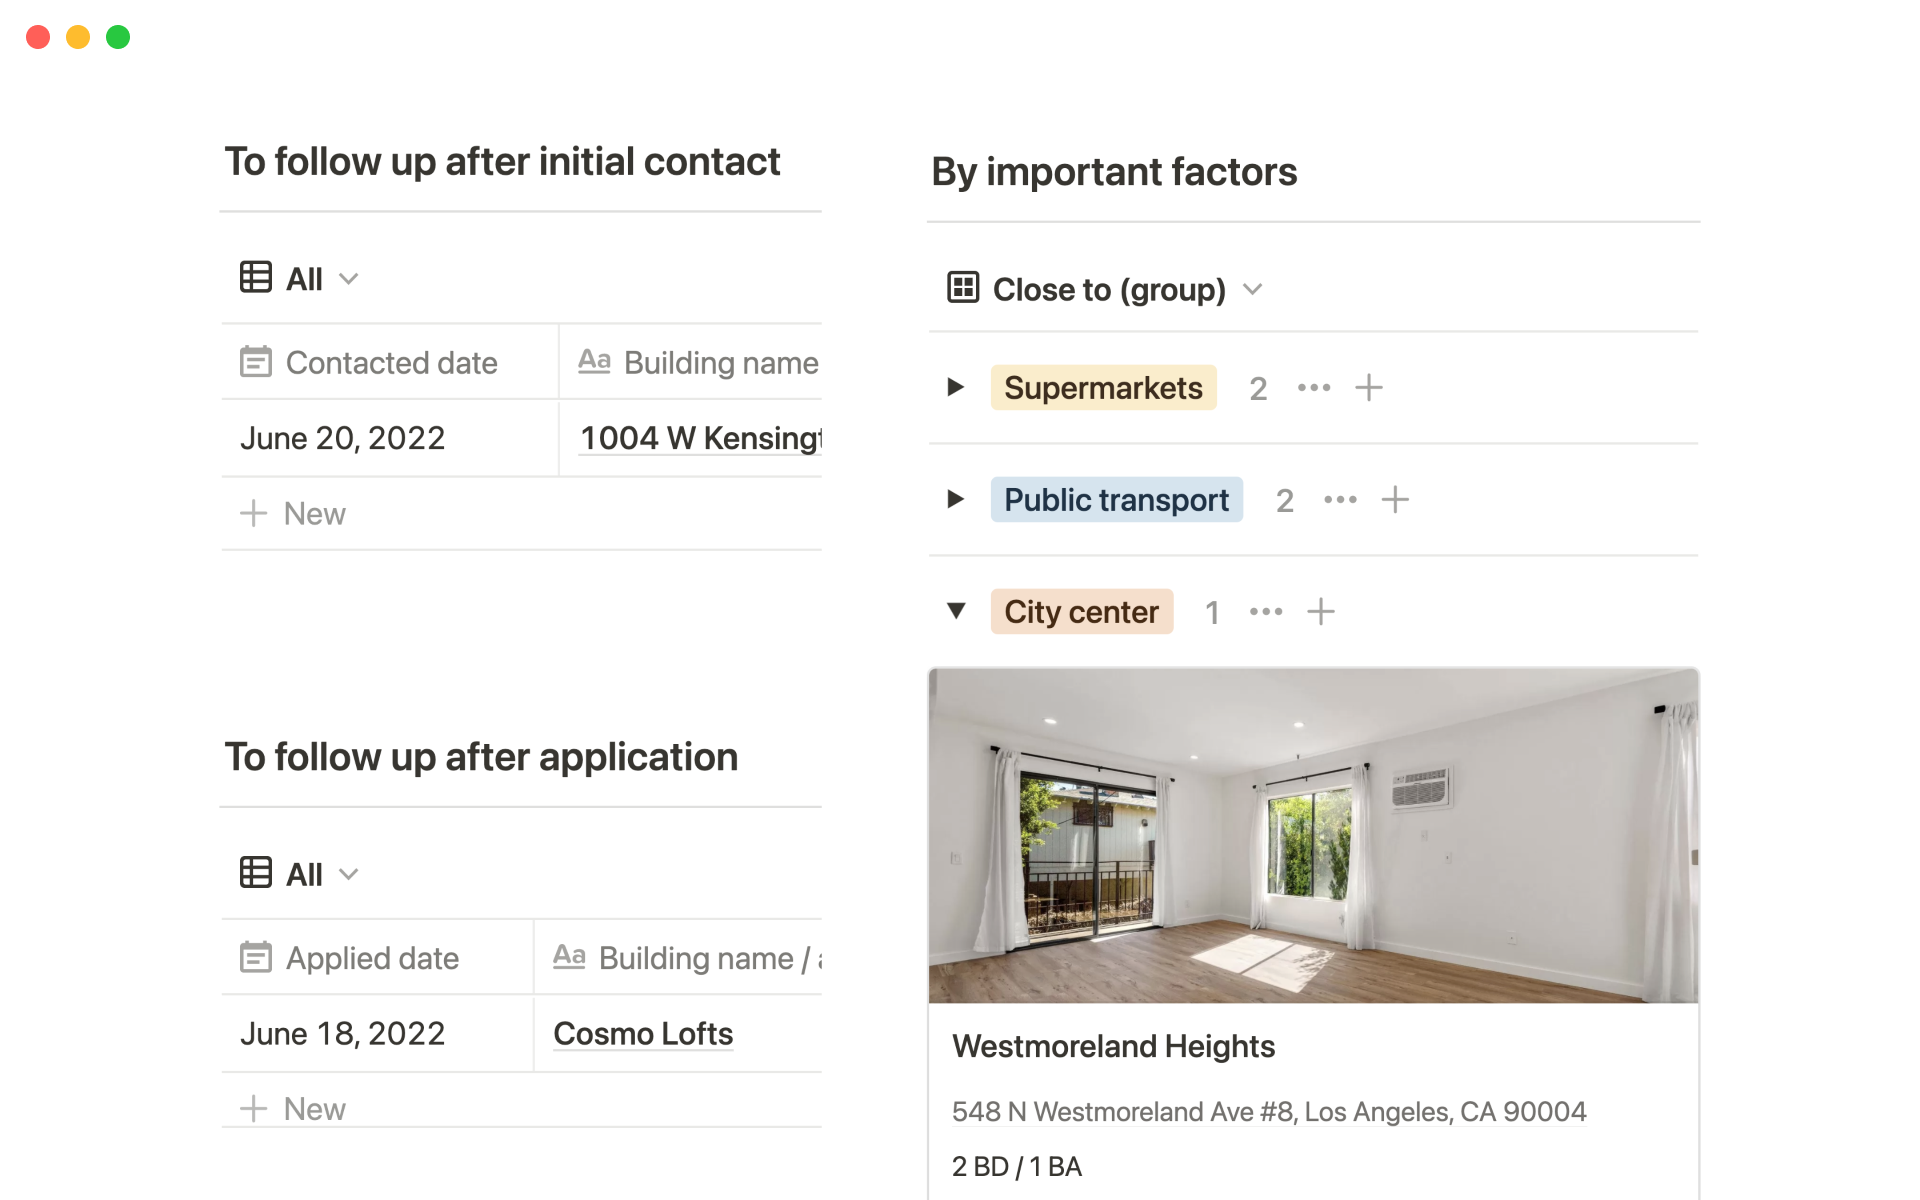 Consolidate all the home listings you like, compare them more efficiently, and track your process with ease.